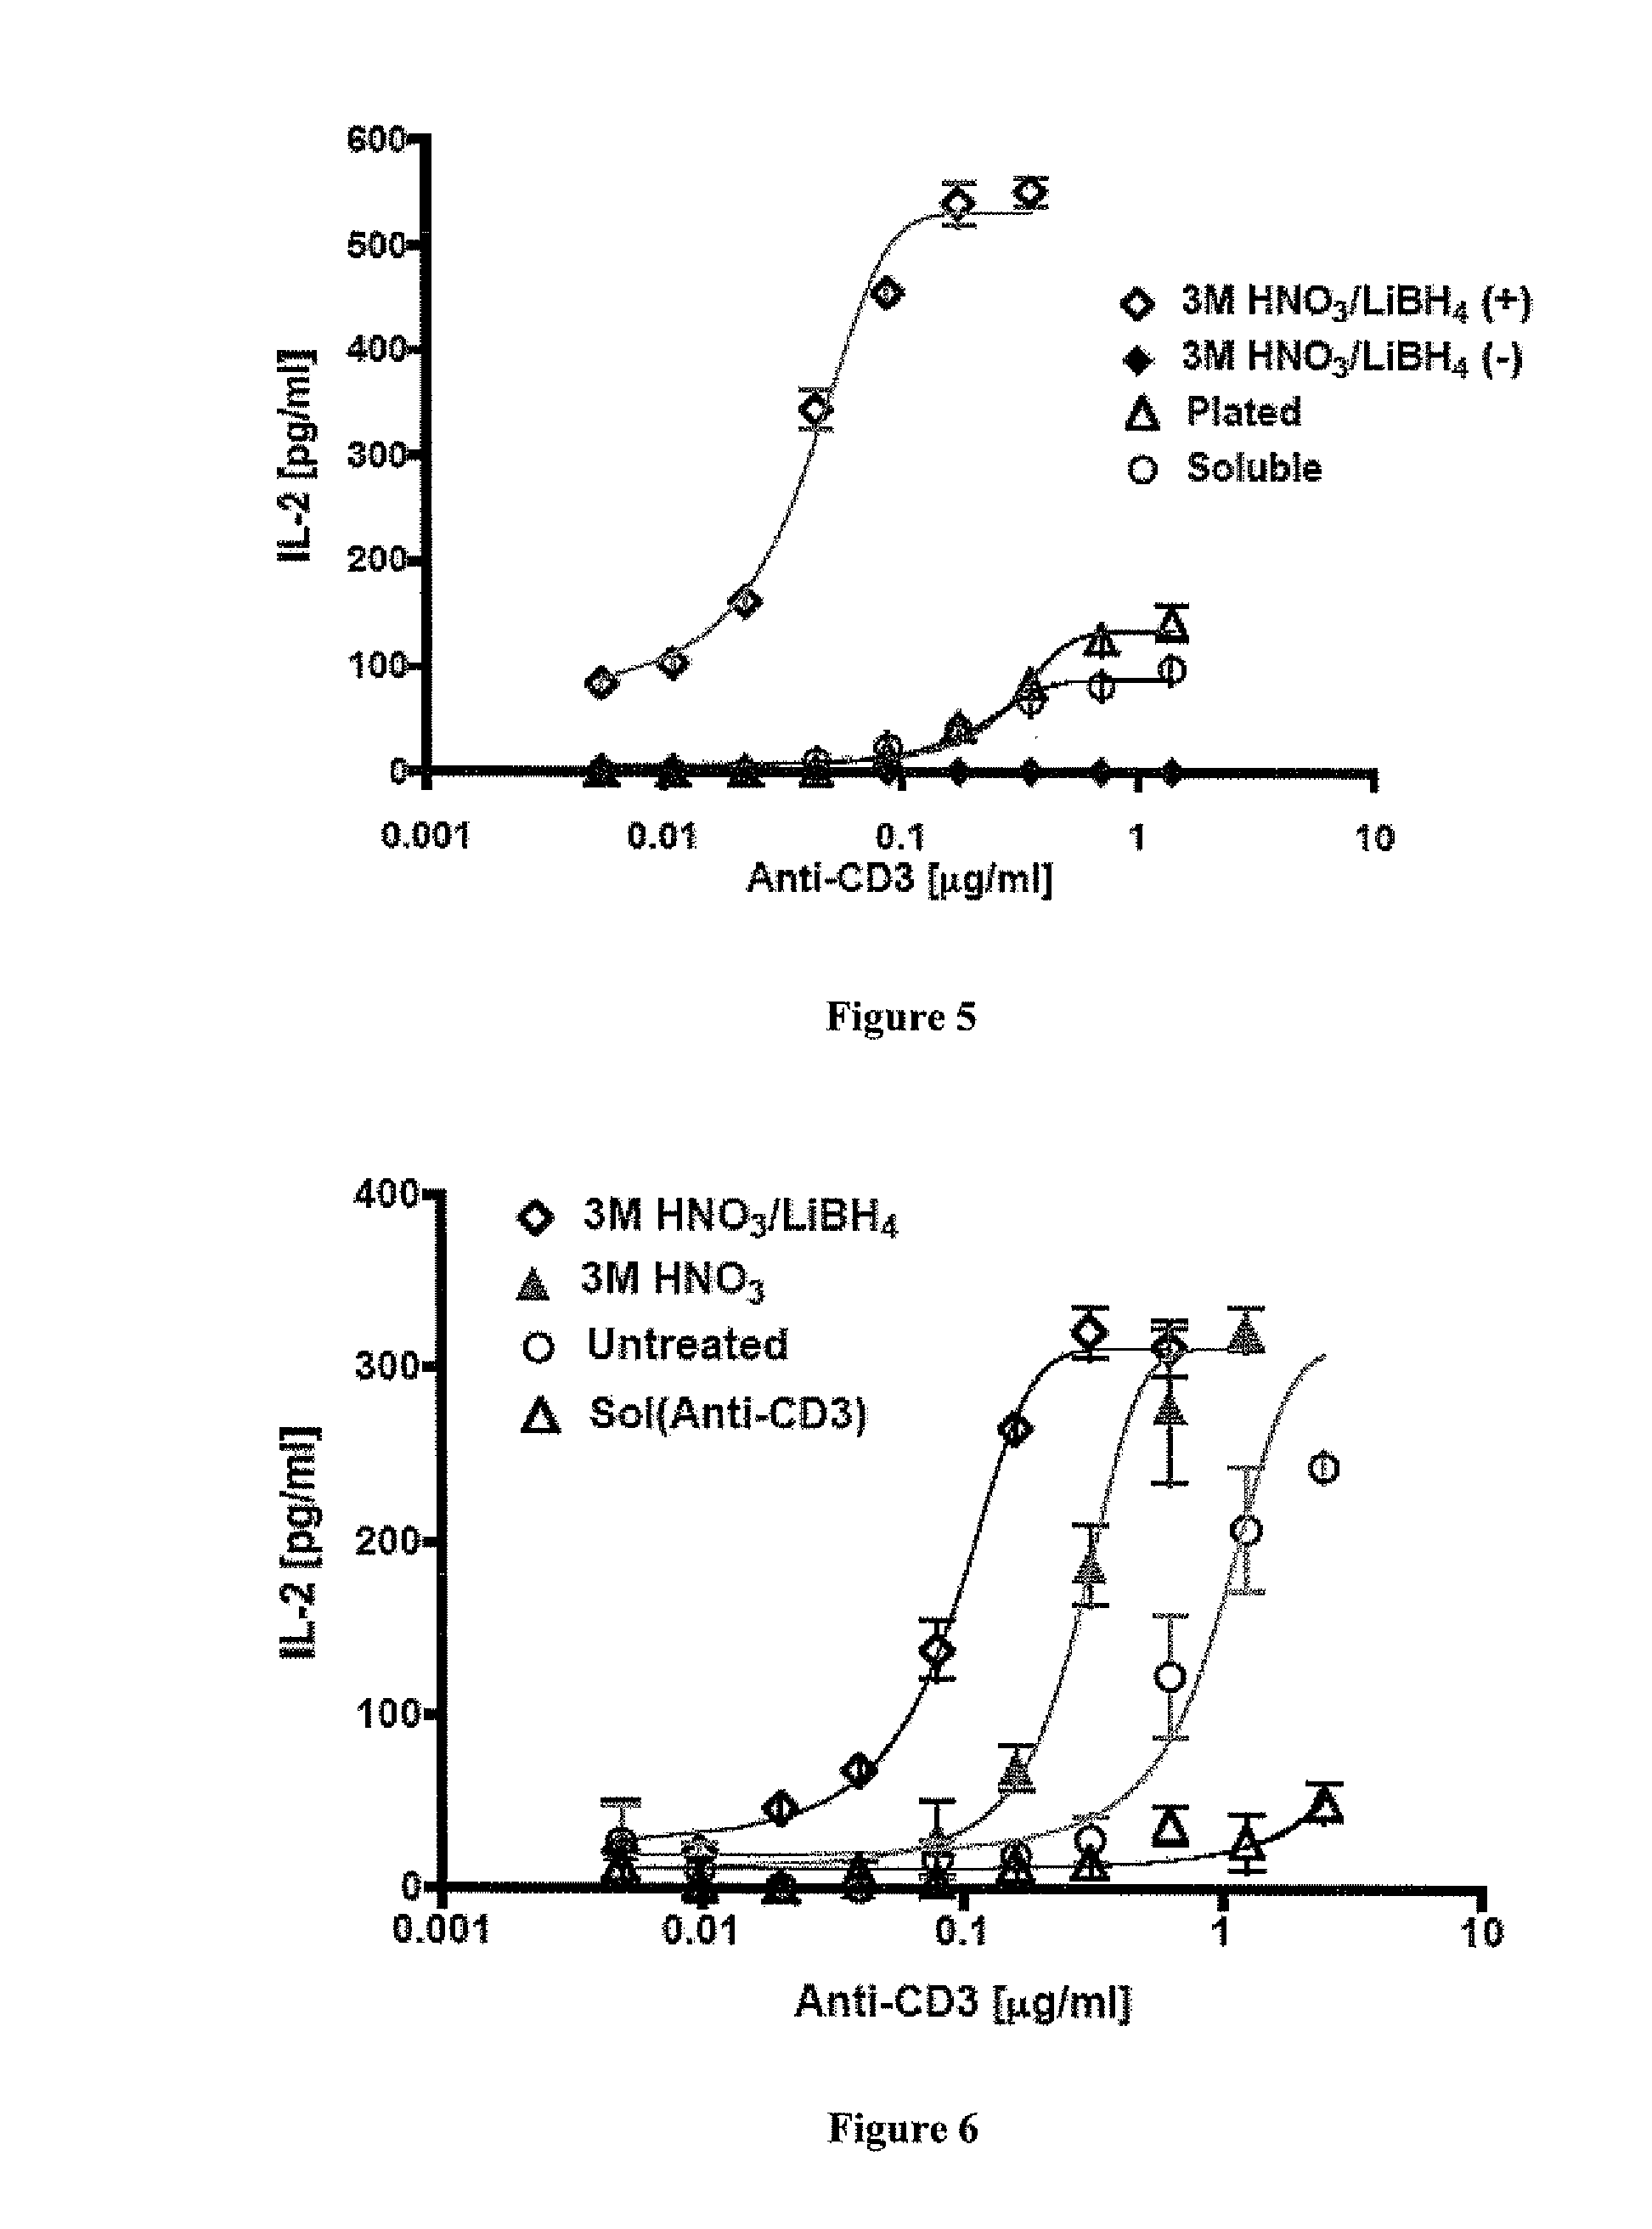 Carbon nanotube compositions and methods of use thereof